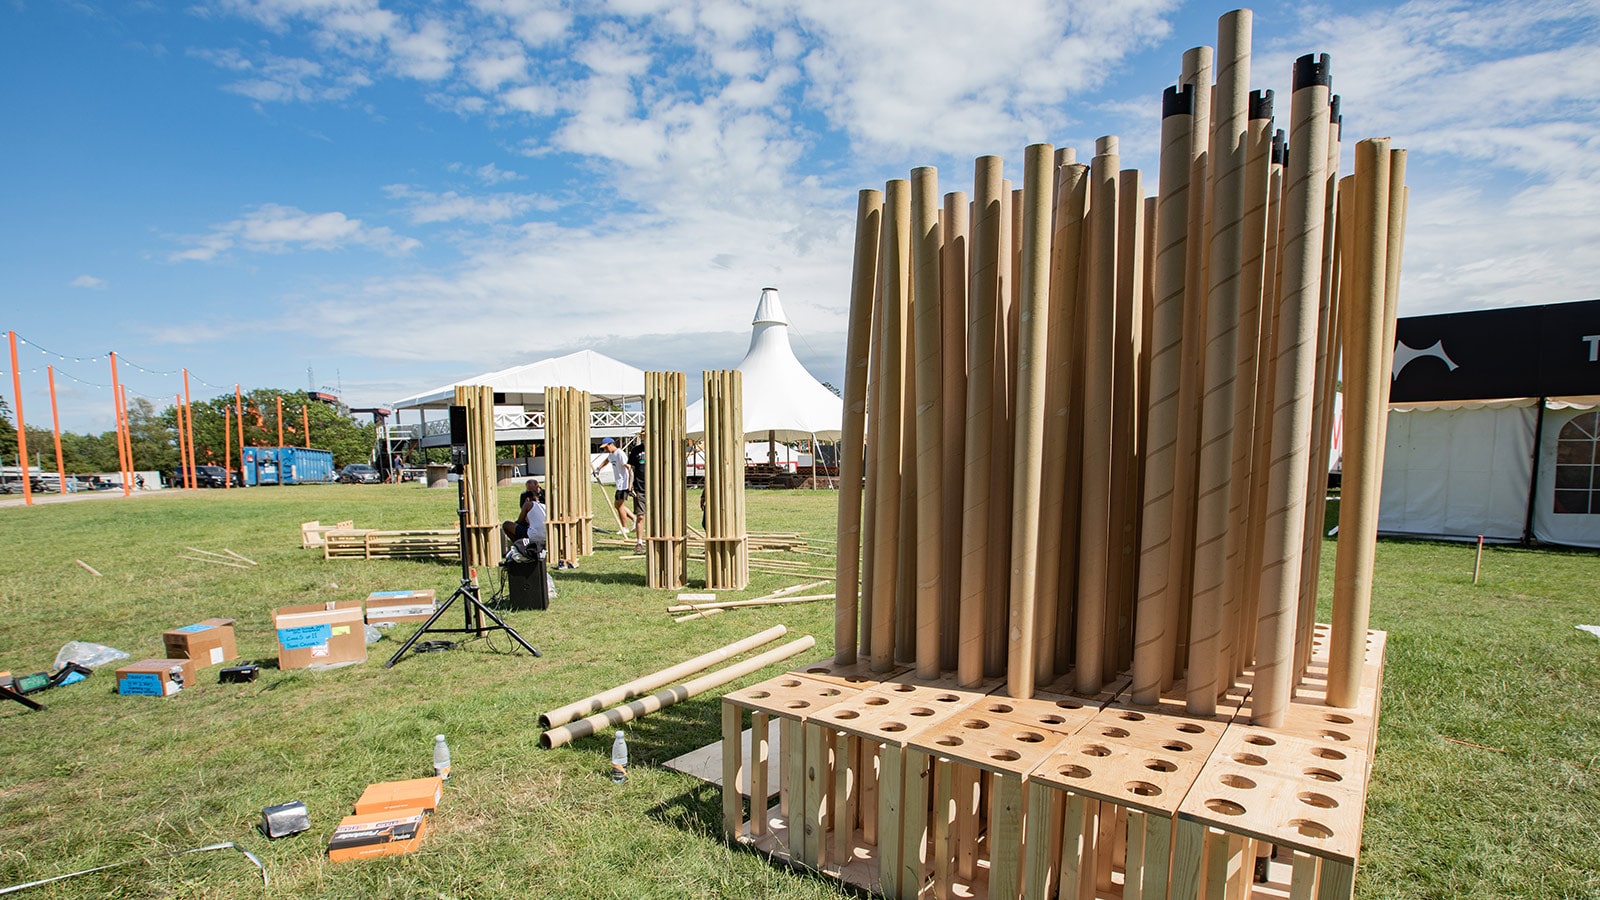 Meyer Sound and Roskilde Festival’s “Sonic Crystals” a Synthesis of Sound Art and Selective Noise Control